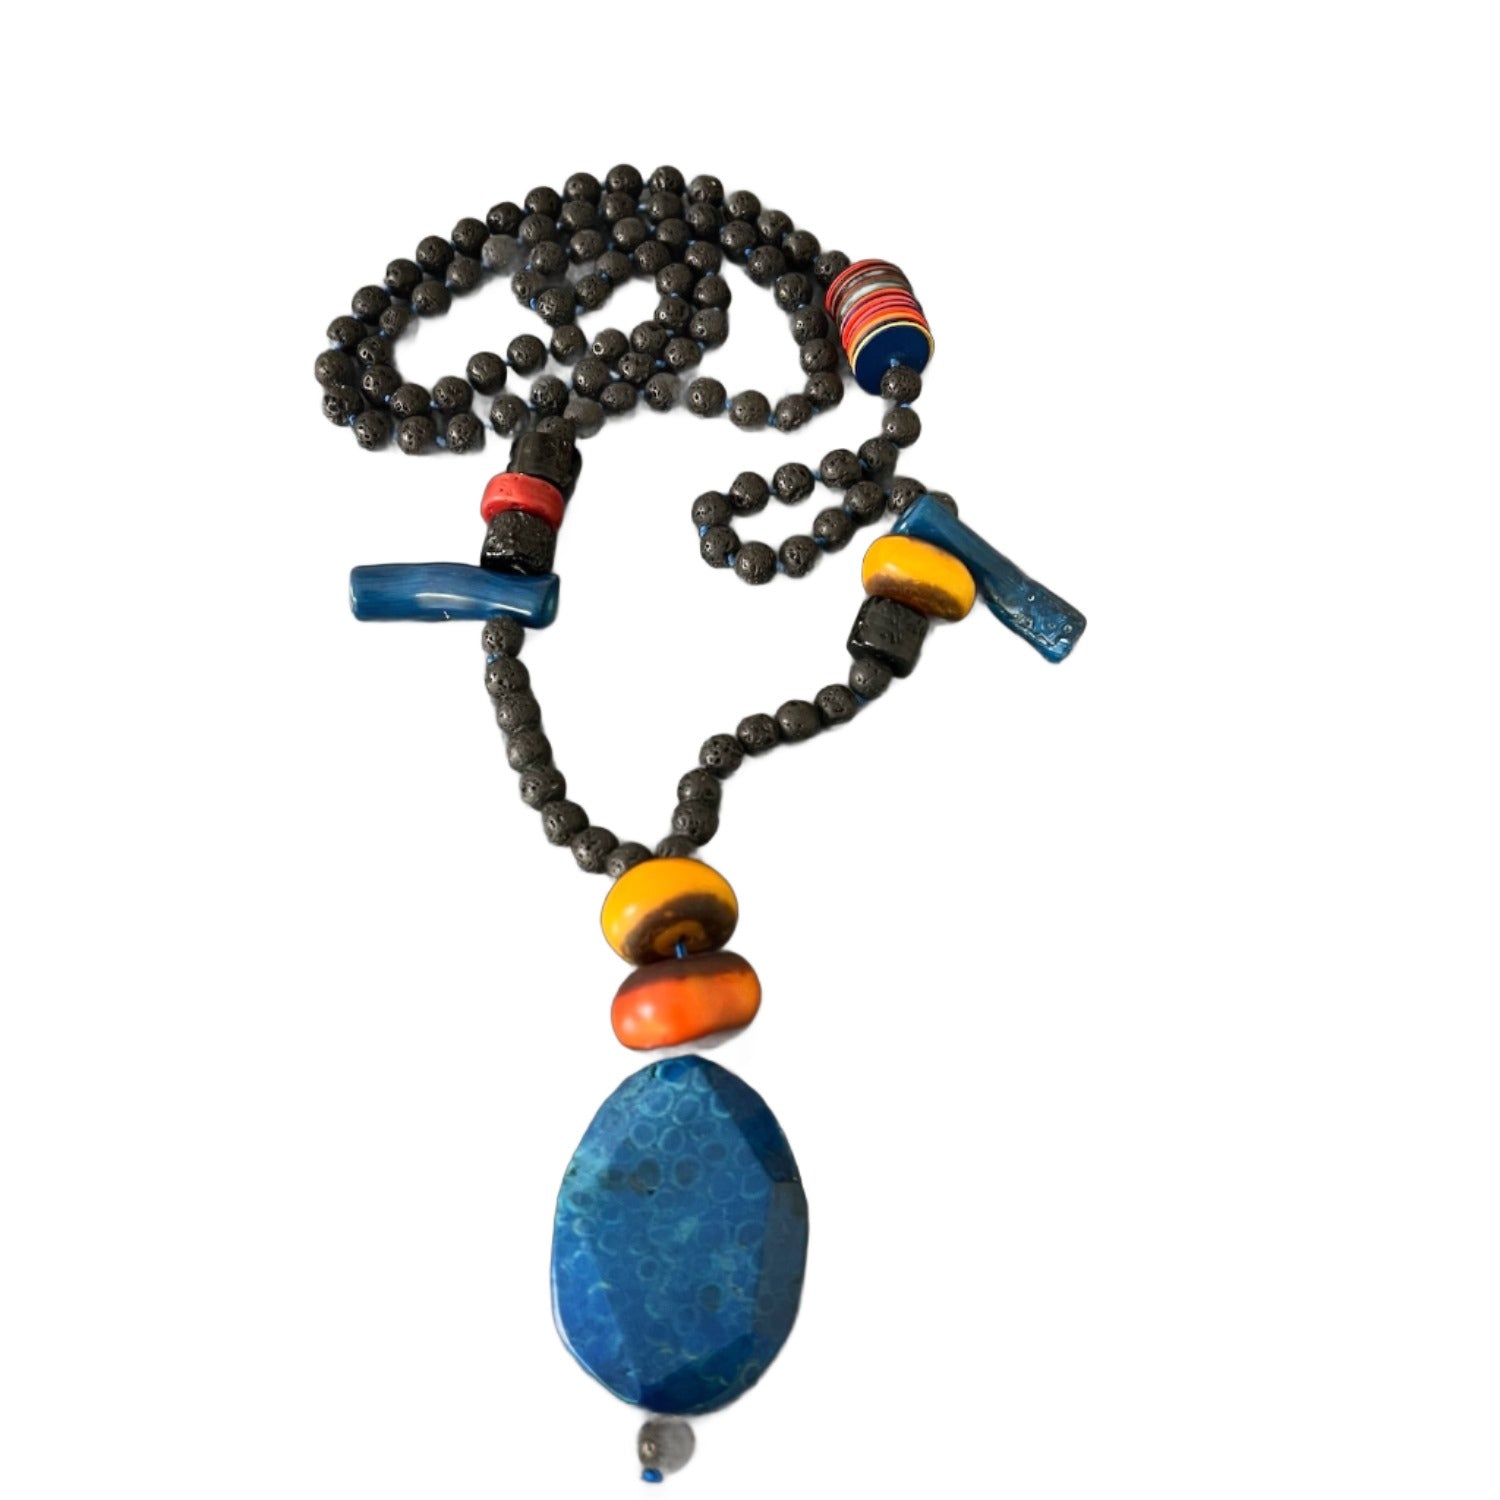 Handcrafted Necklace with Black Lava Rock, Blue Coral, Afghan, and Nepal Beads